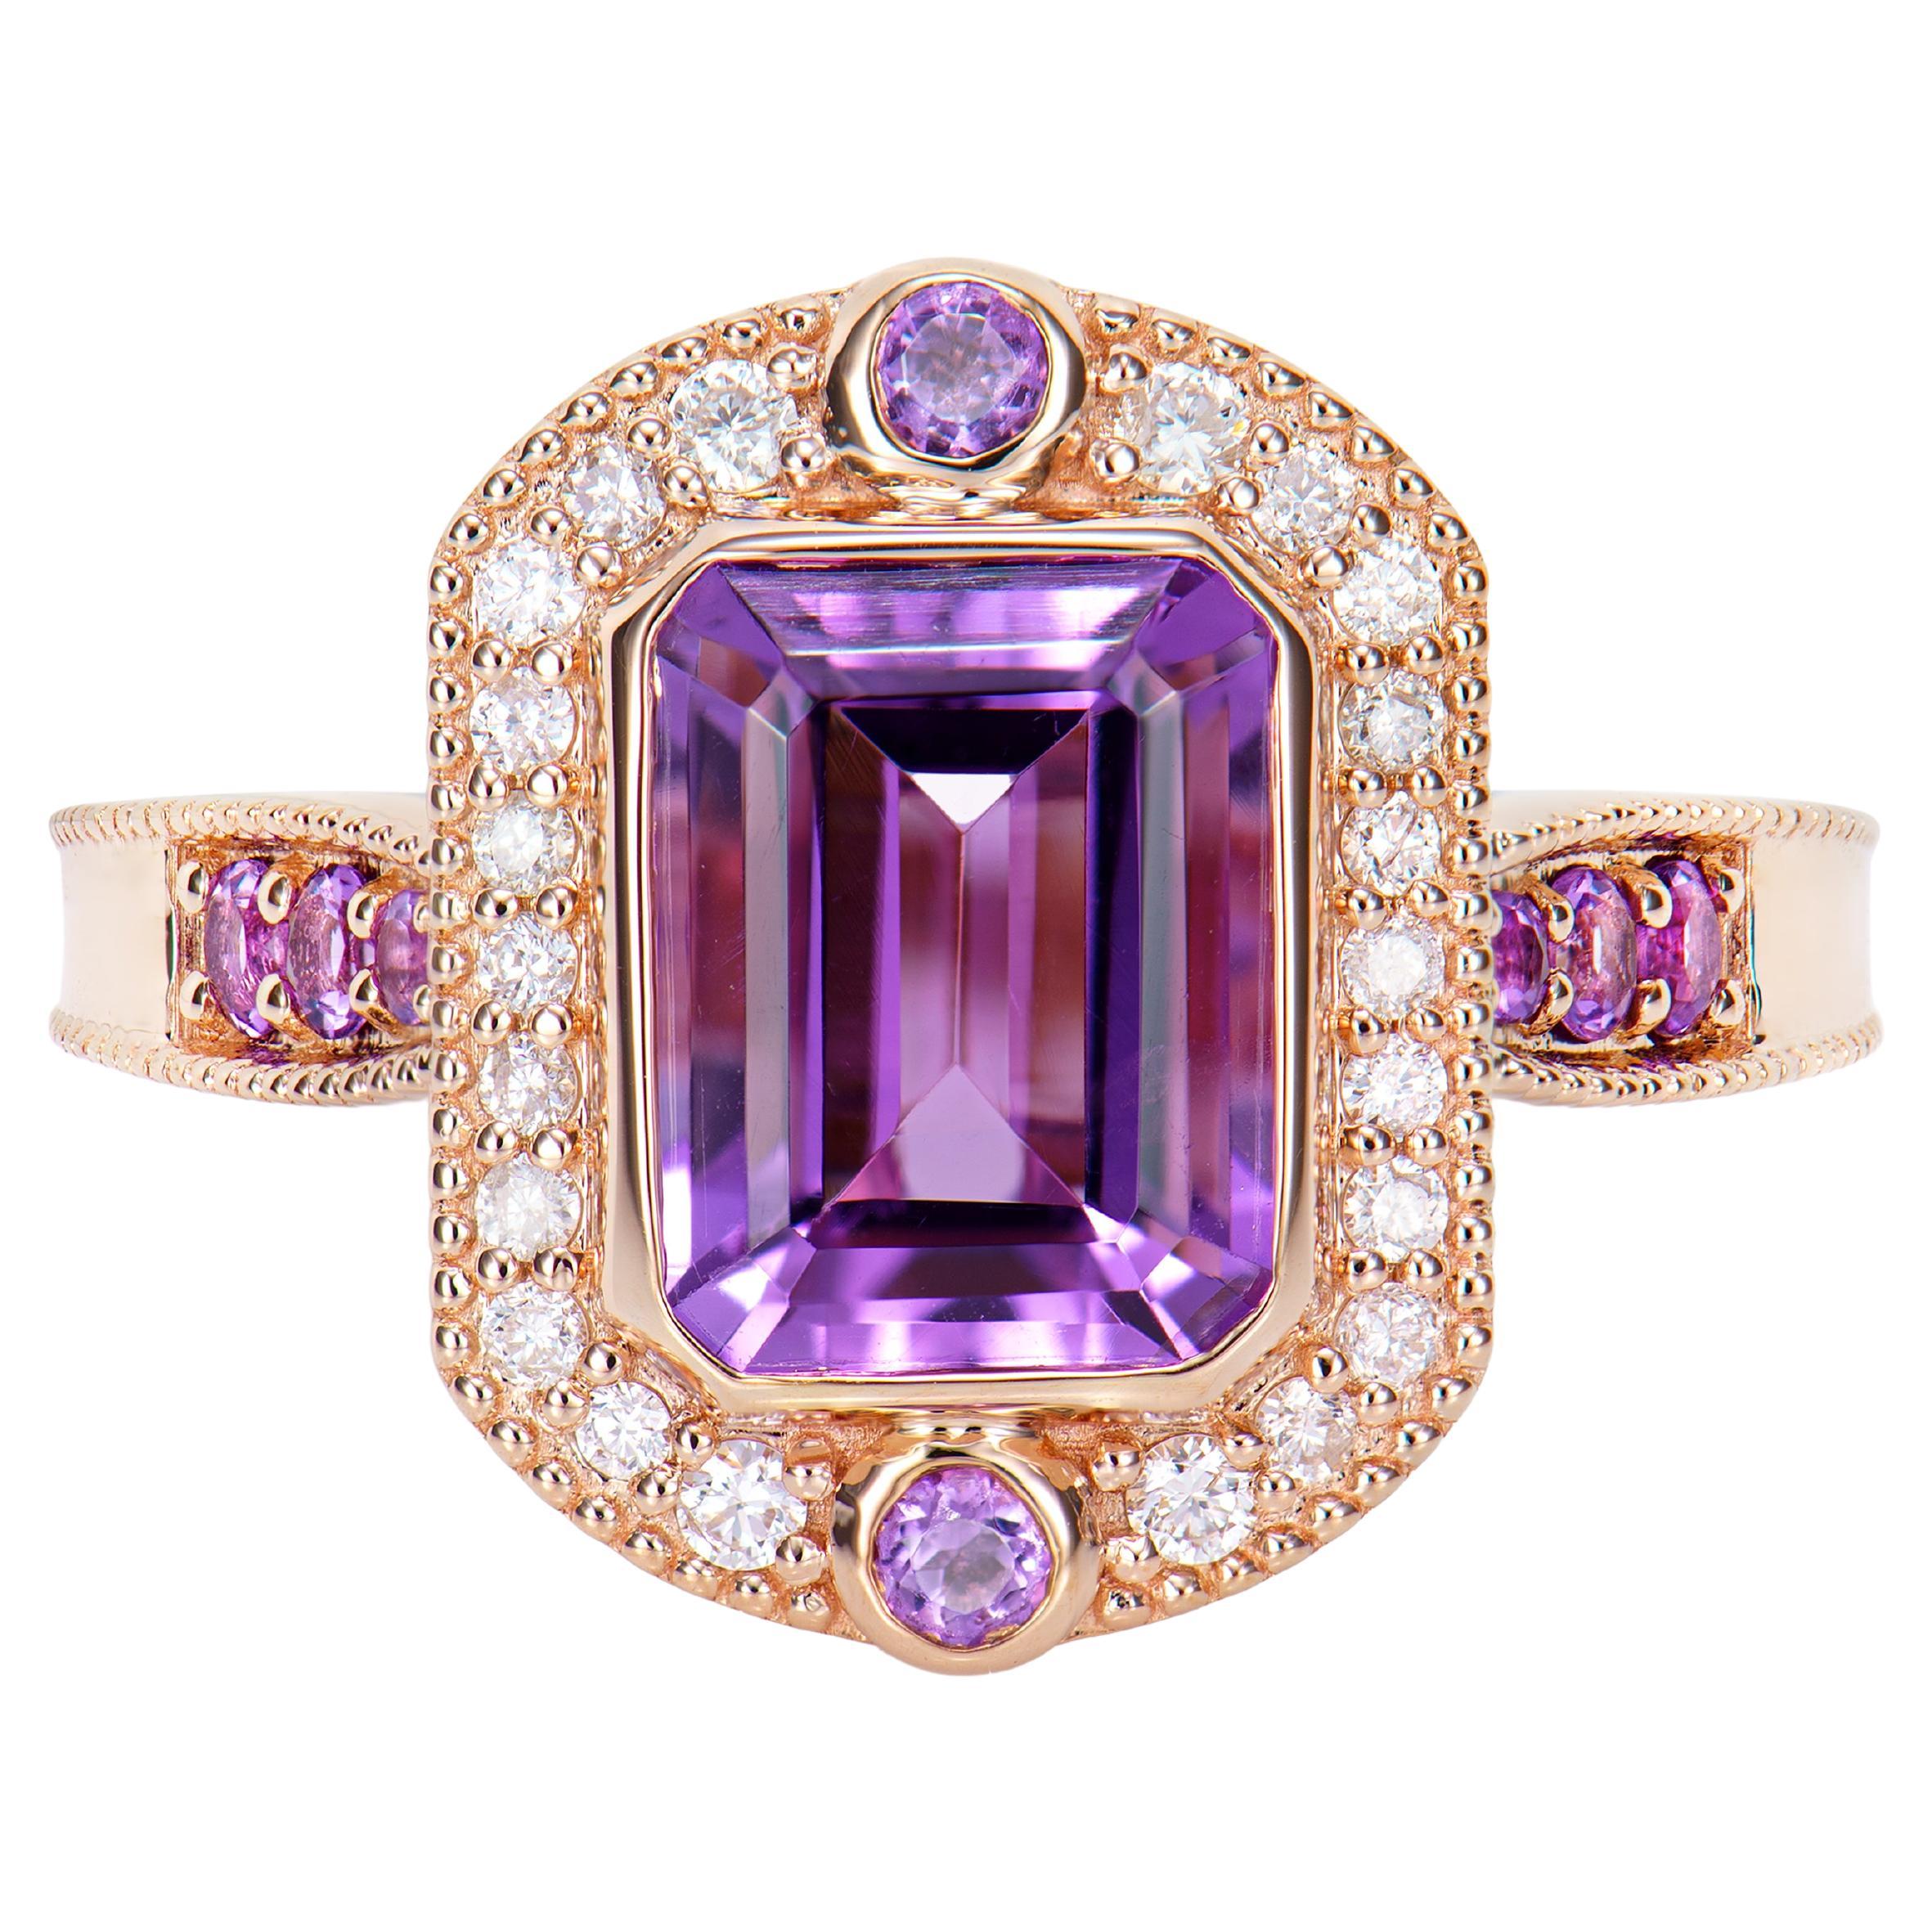 2.20 Carat Amethyst Fancy Ring in 14Karat Rose Gold with White Diamond.   For Sale